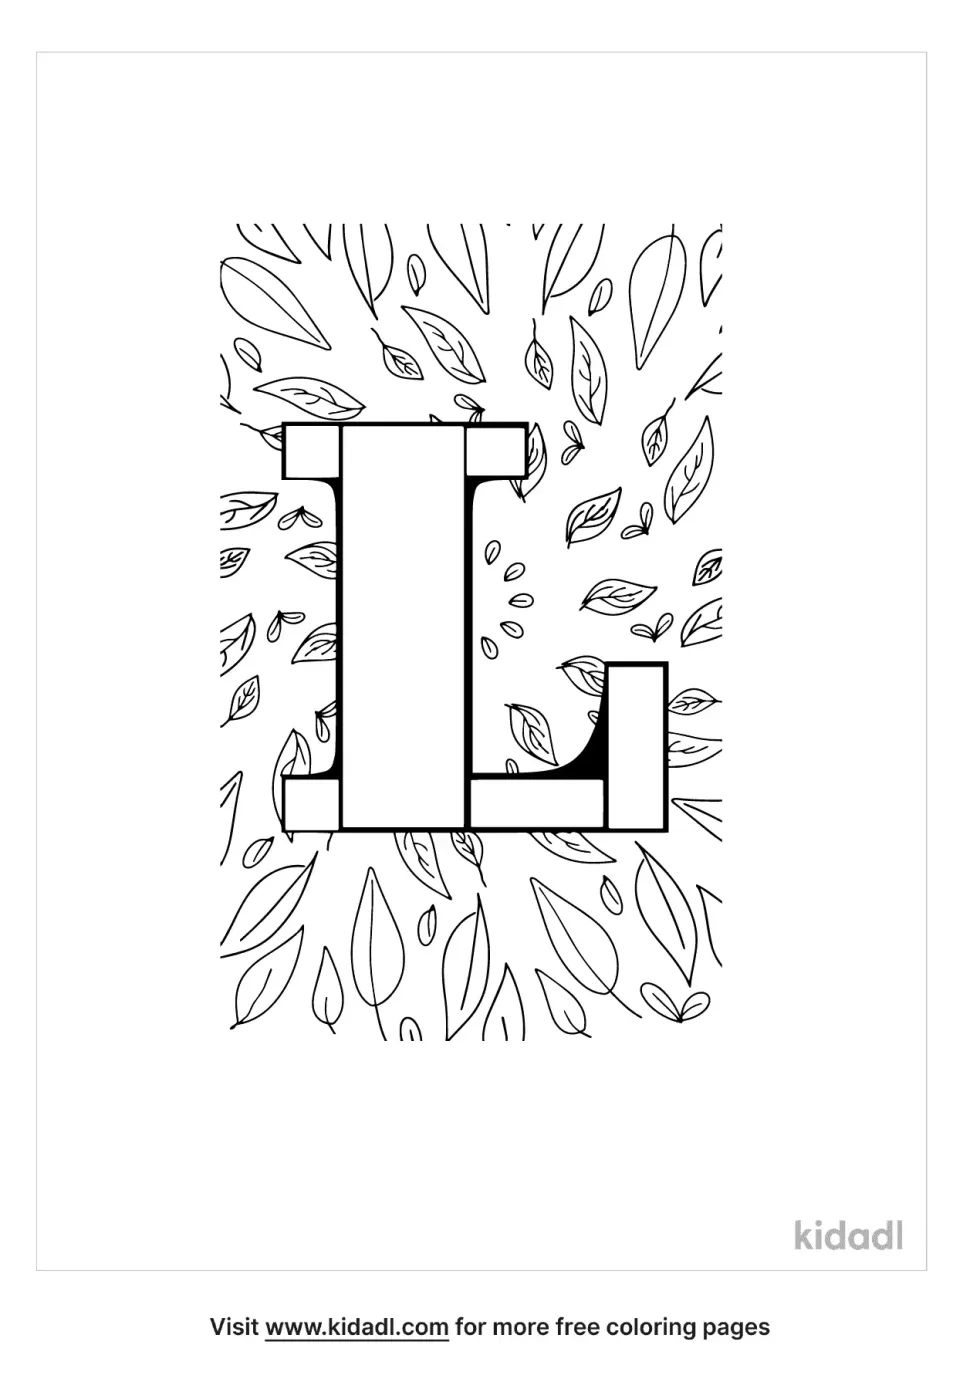 L Coloring Page